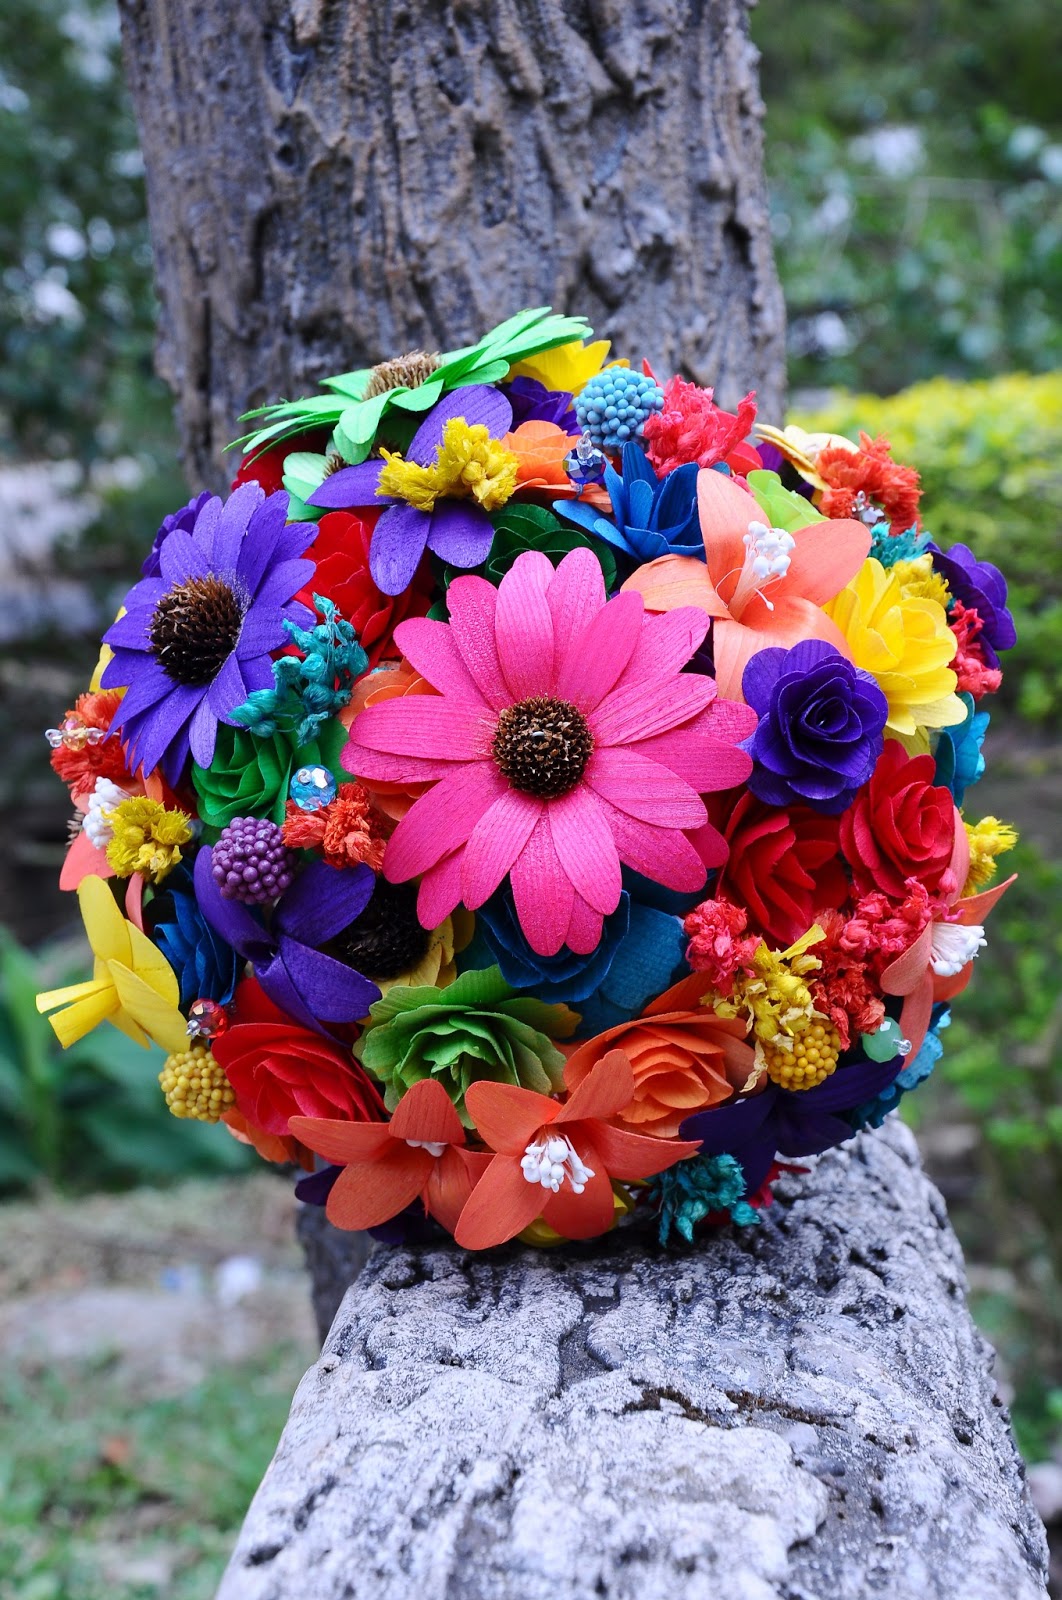 Wholesale Wedding Bouquets made of Wooden Flowers | Reduce ...